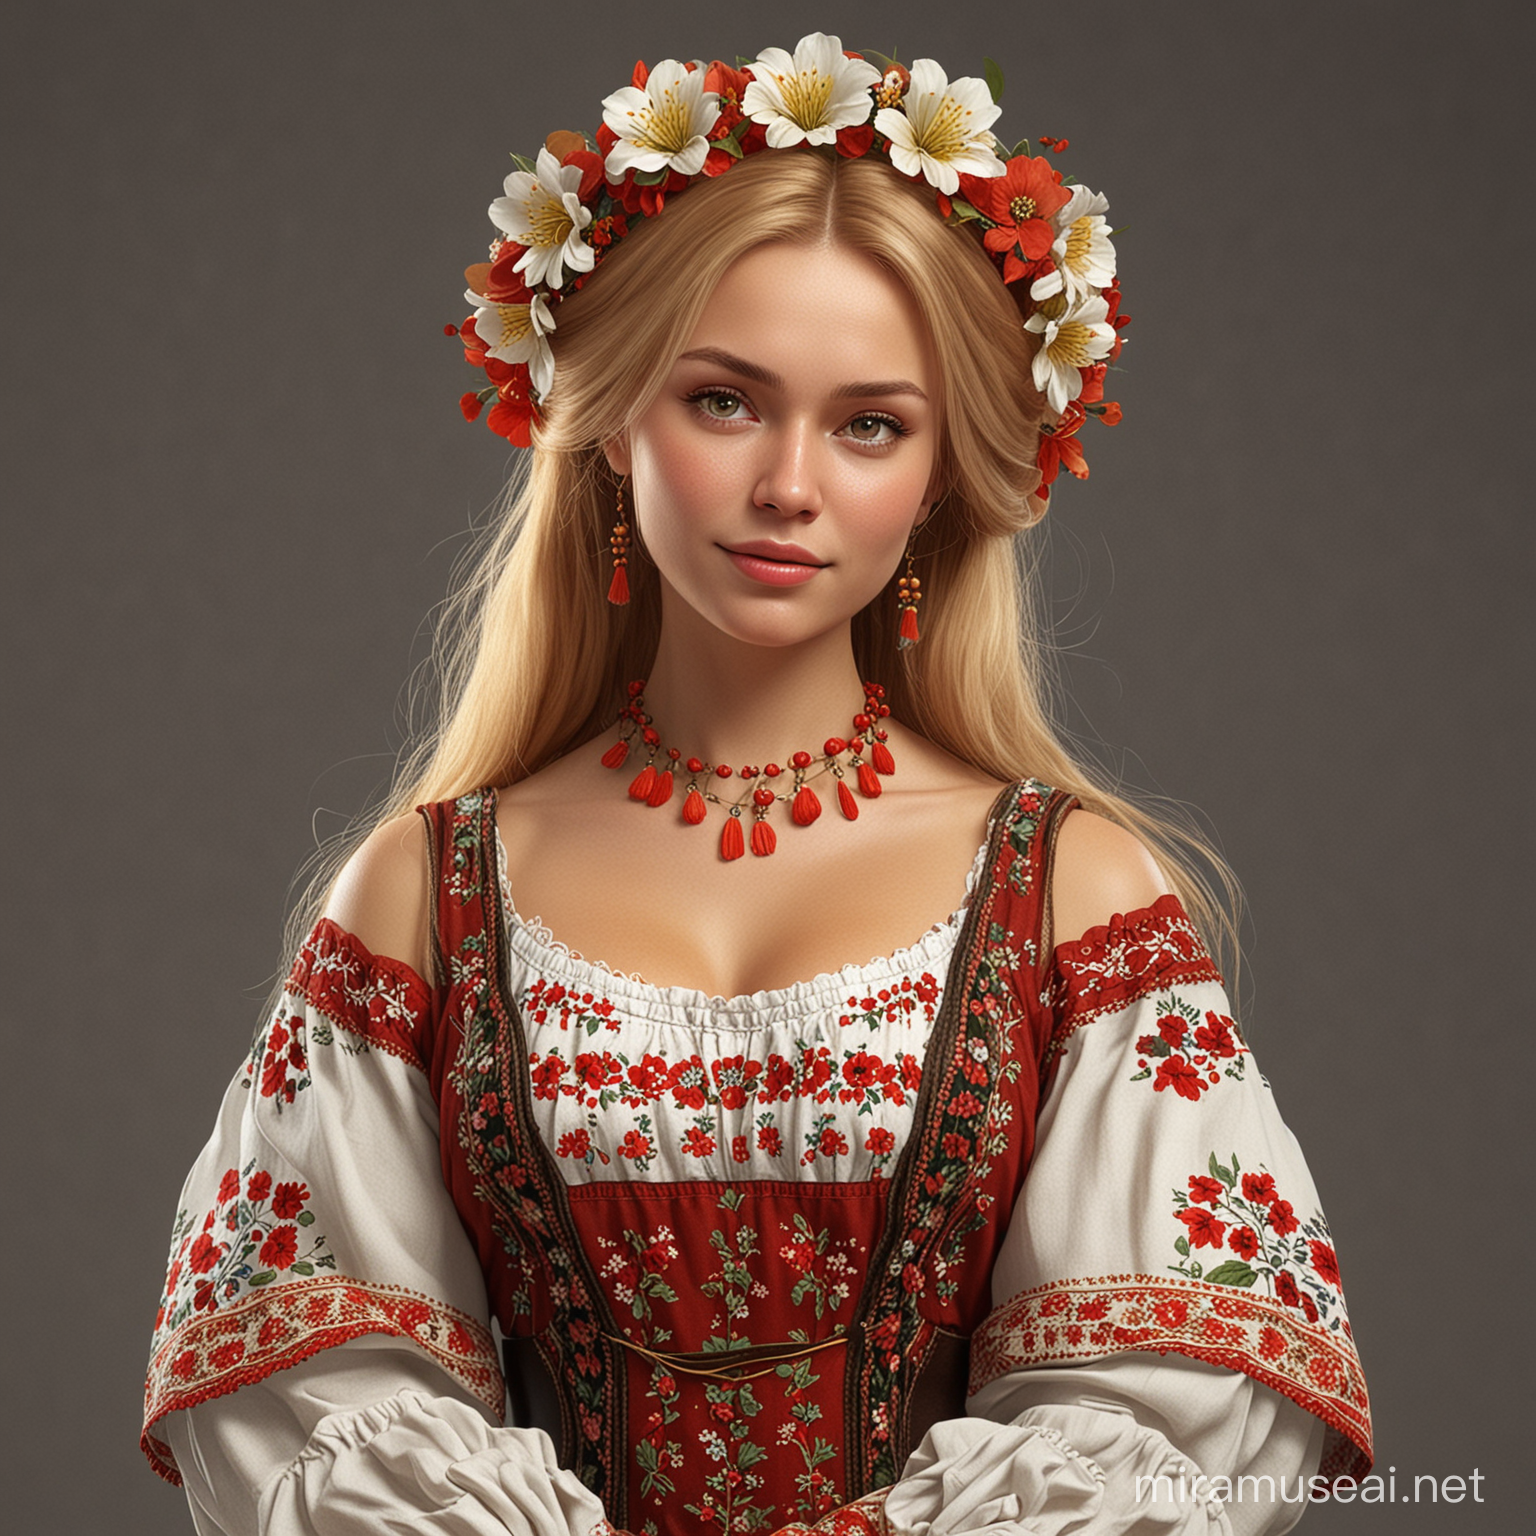 Russian woman in folk costume with russet loose blond hair, in which flowers are woven. She is very embarrassed, her cheeks are red, she looks away. She looks sexy.We see her in full height, with arms and legs.In the style of realism, 3D animation.